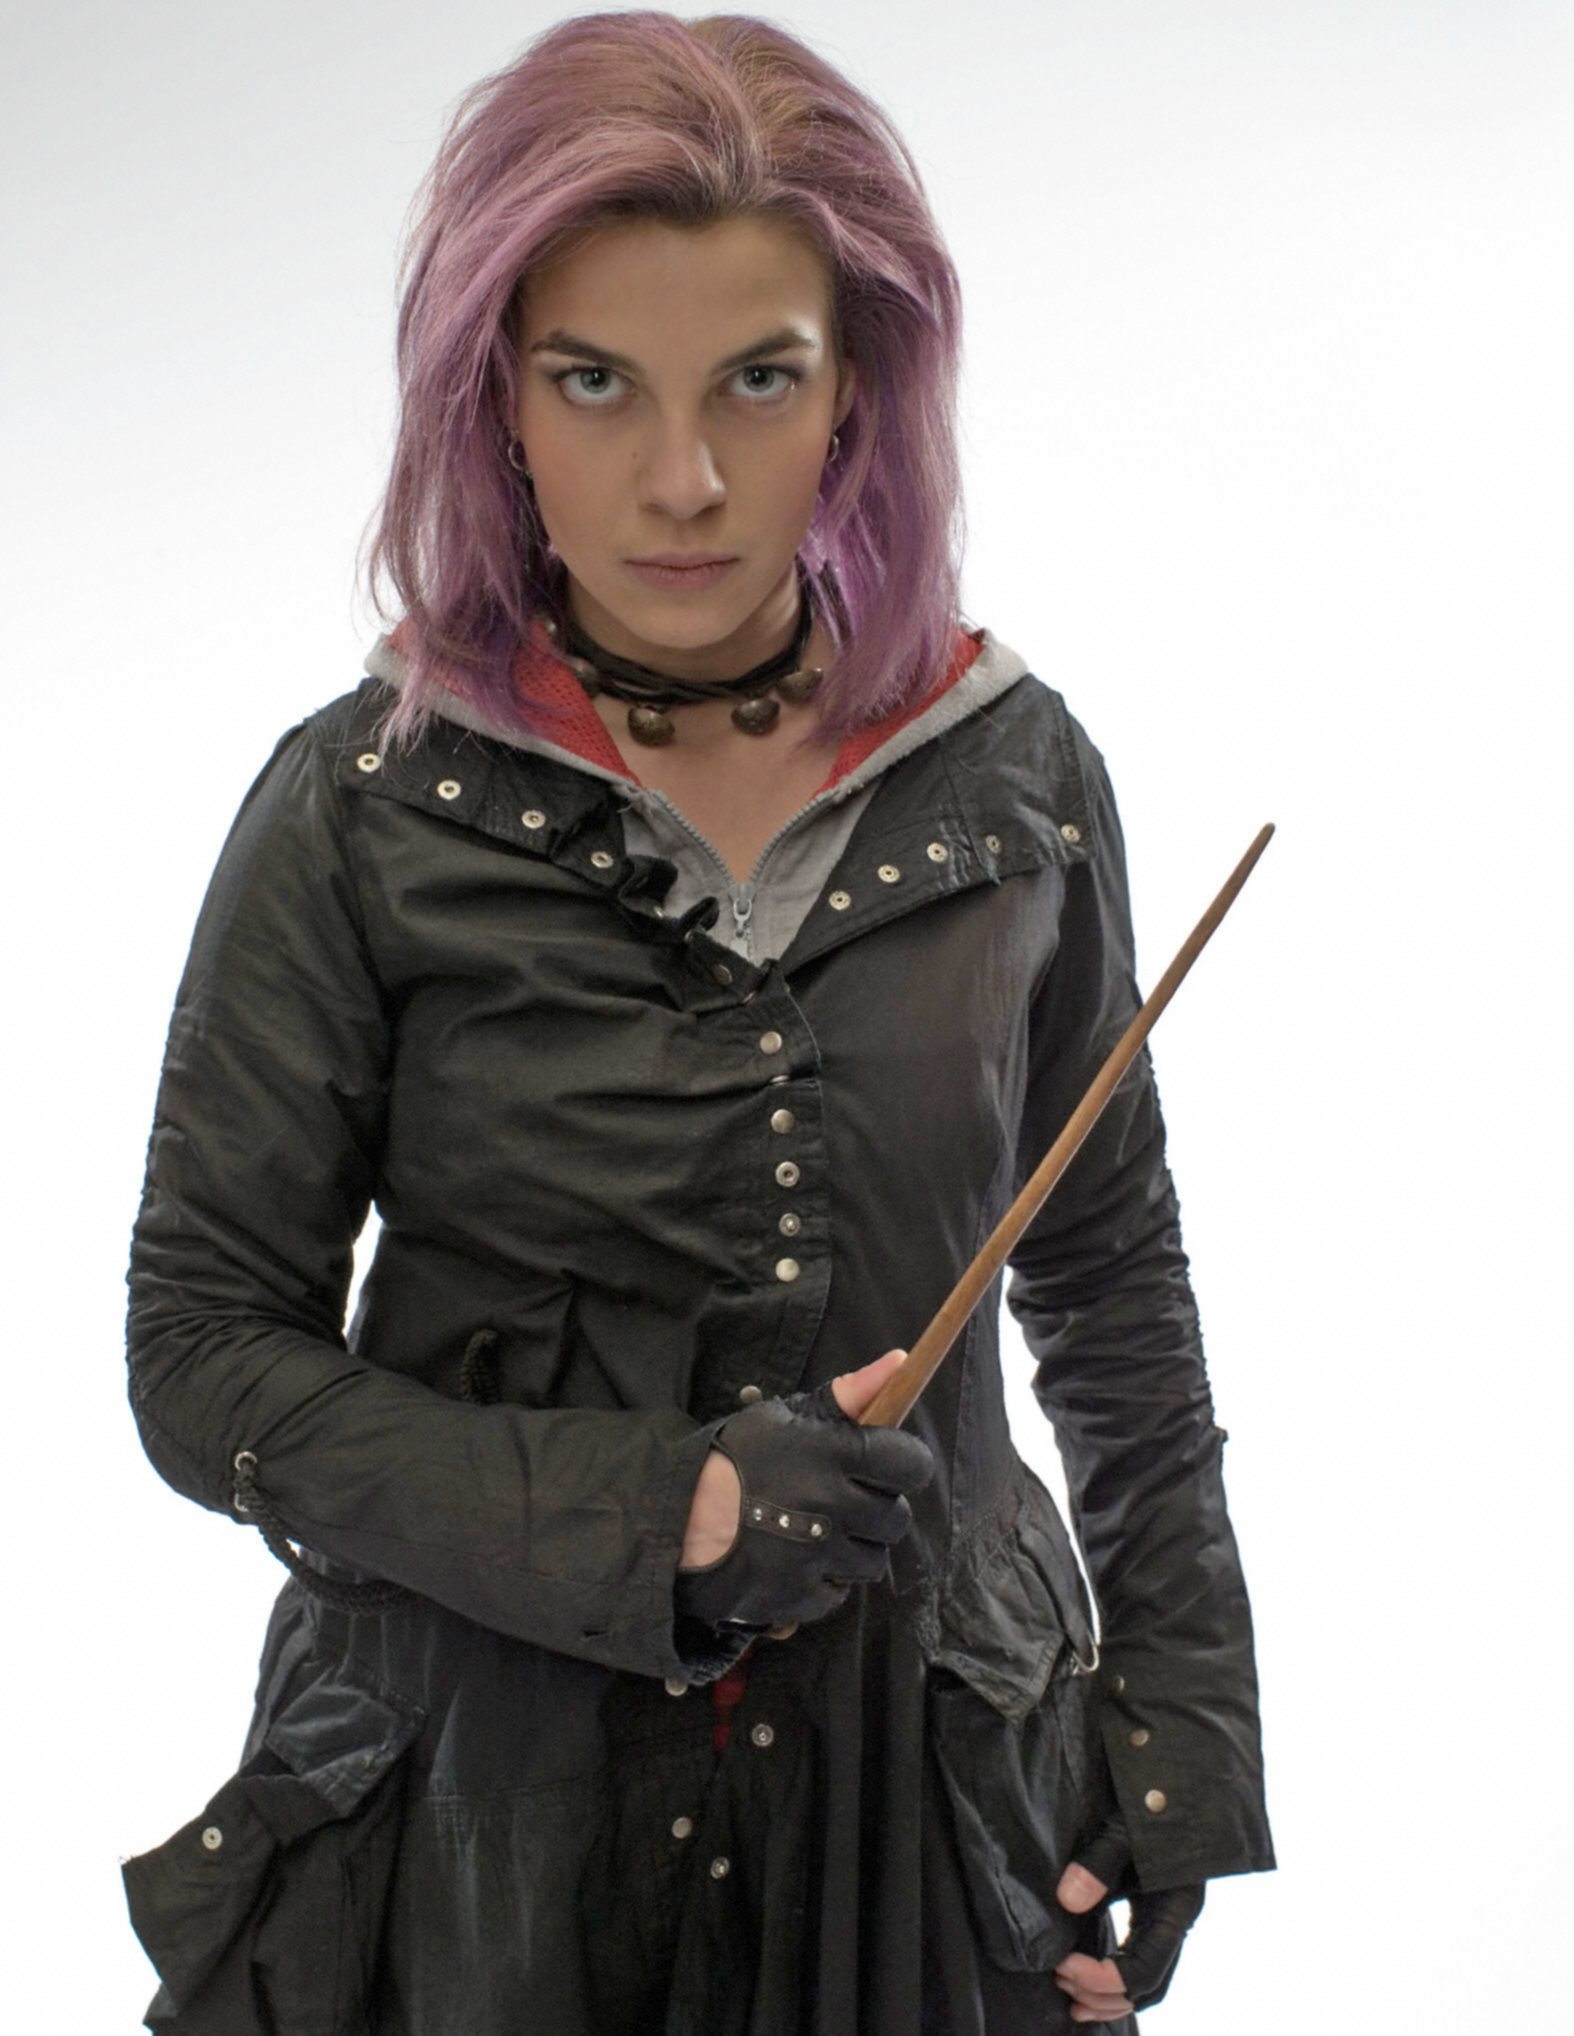 Who Played Nymphadora Tonks In The Harry Potter Series?